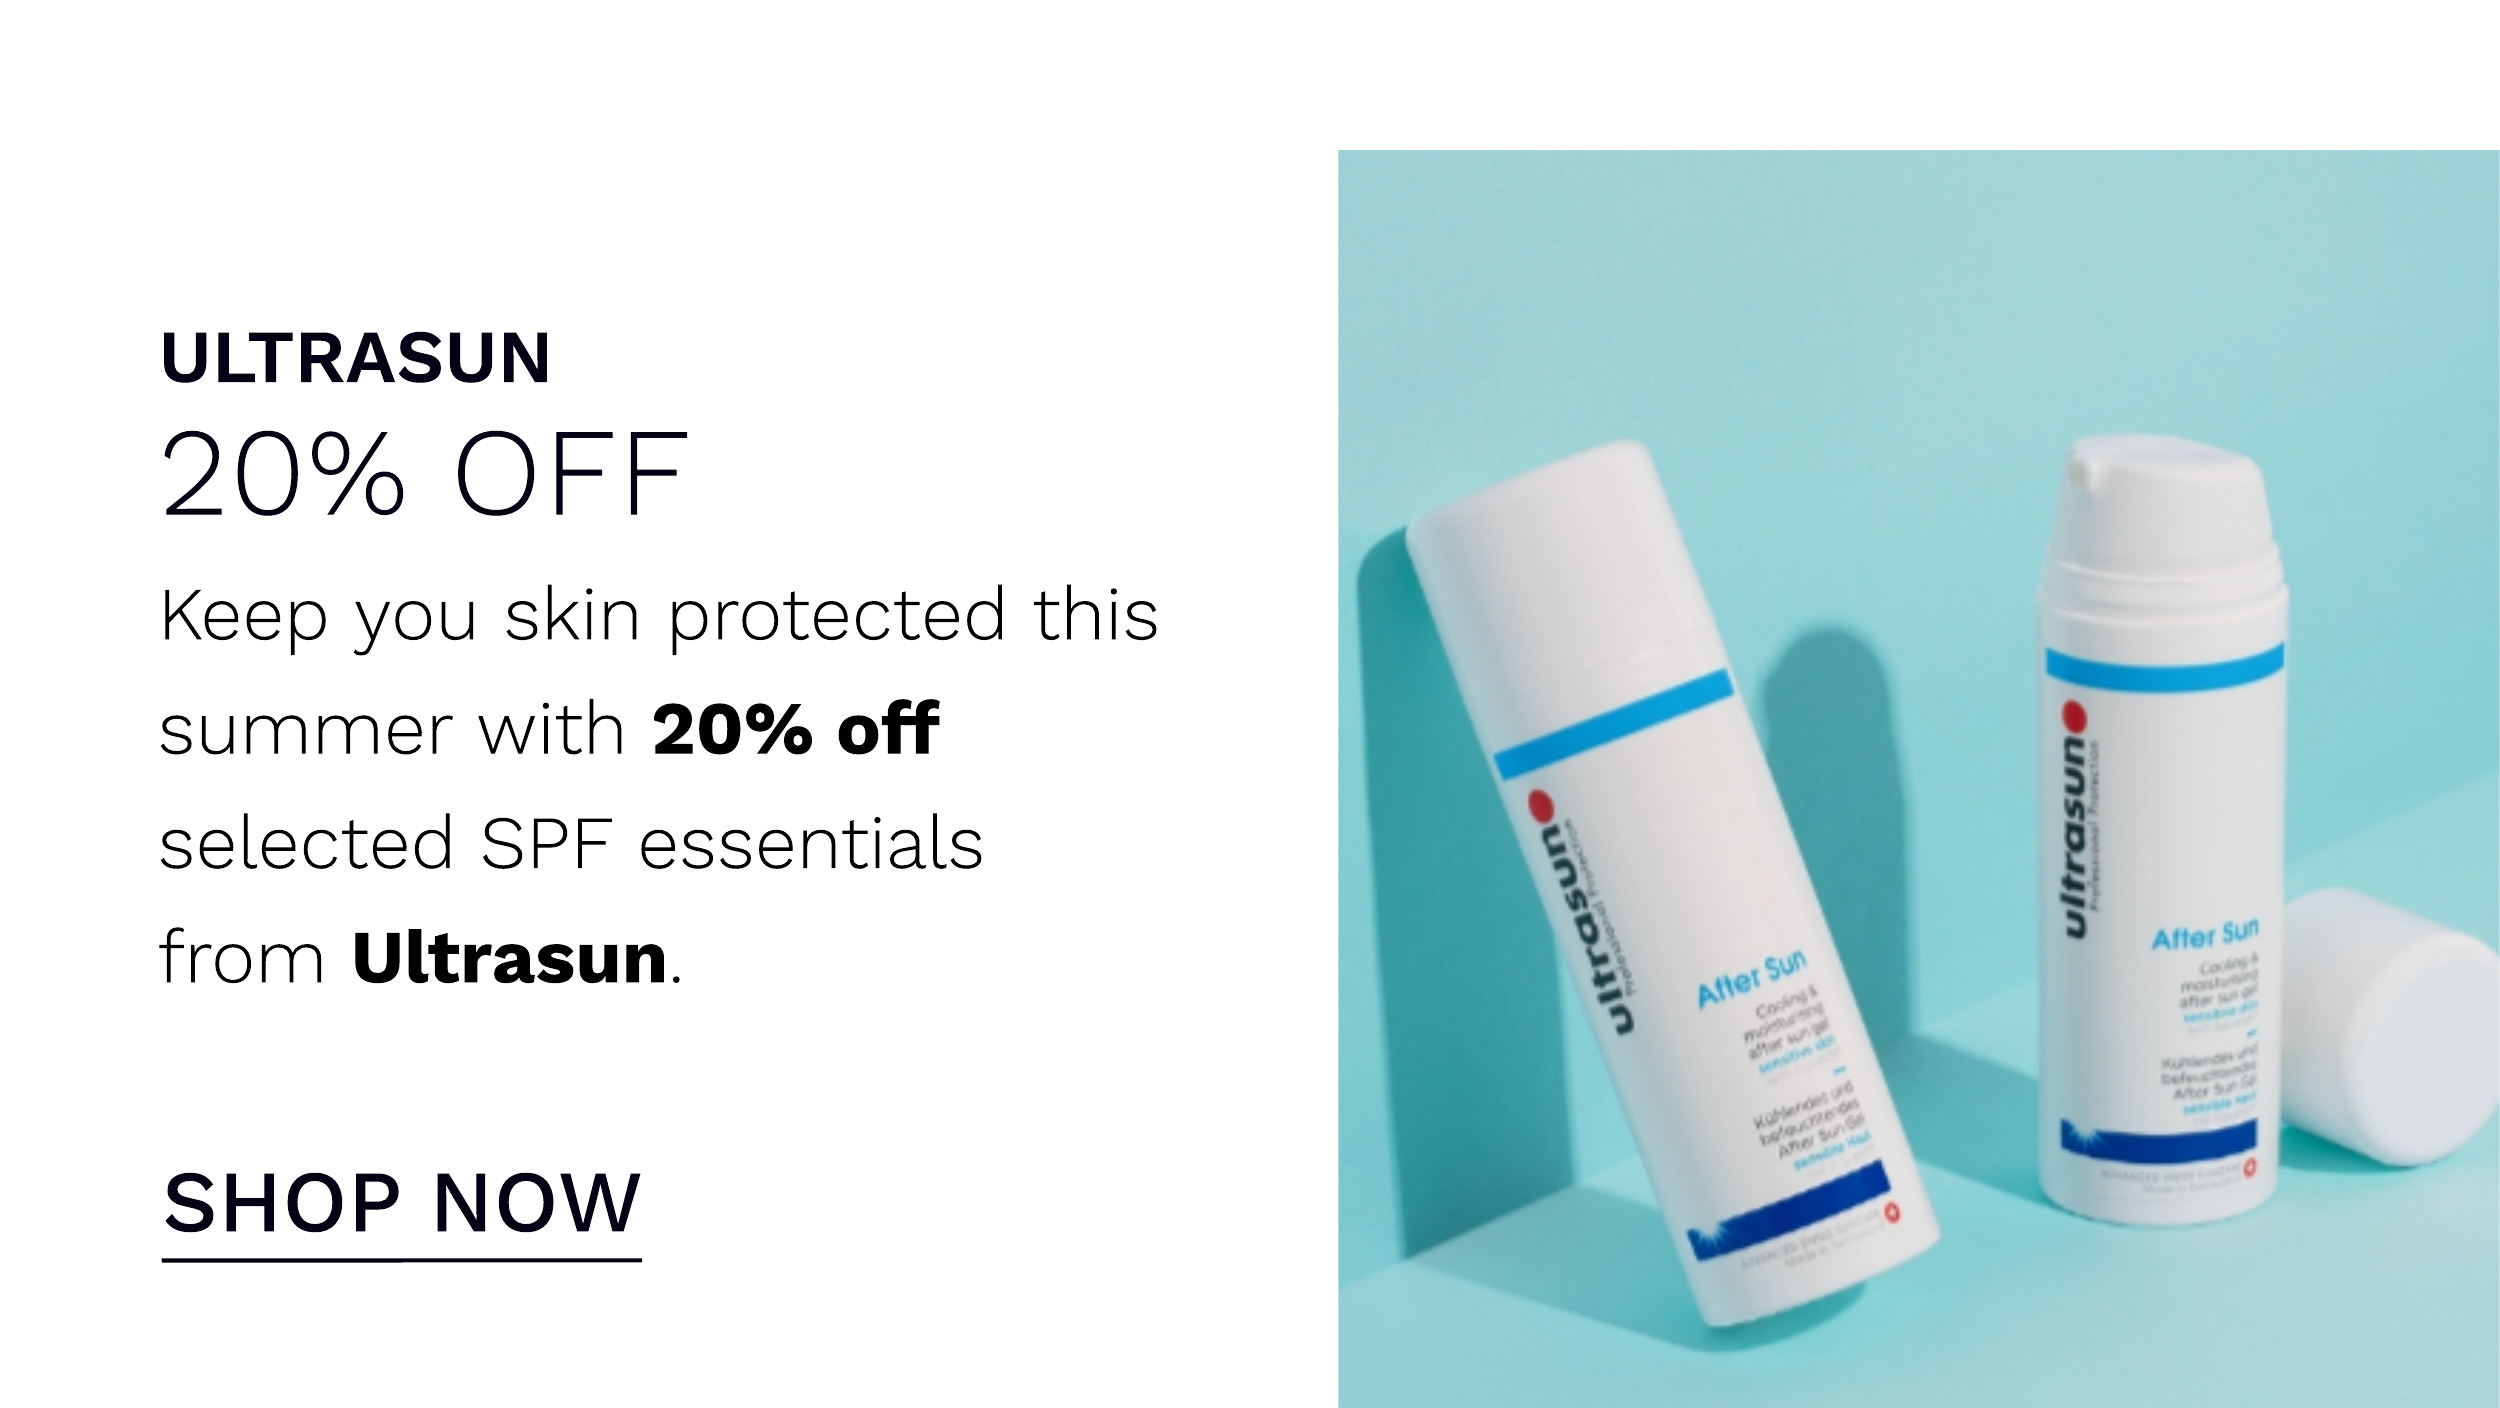 ULTRASUN 20% OFF Keep you skin protected this summer with 20% off selected SPF essentials from Ultrasun. SHOP NOW 